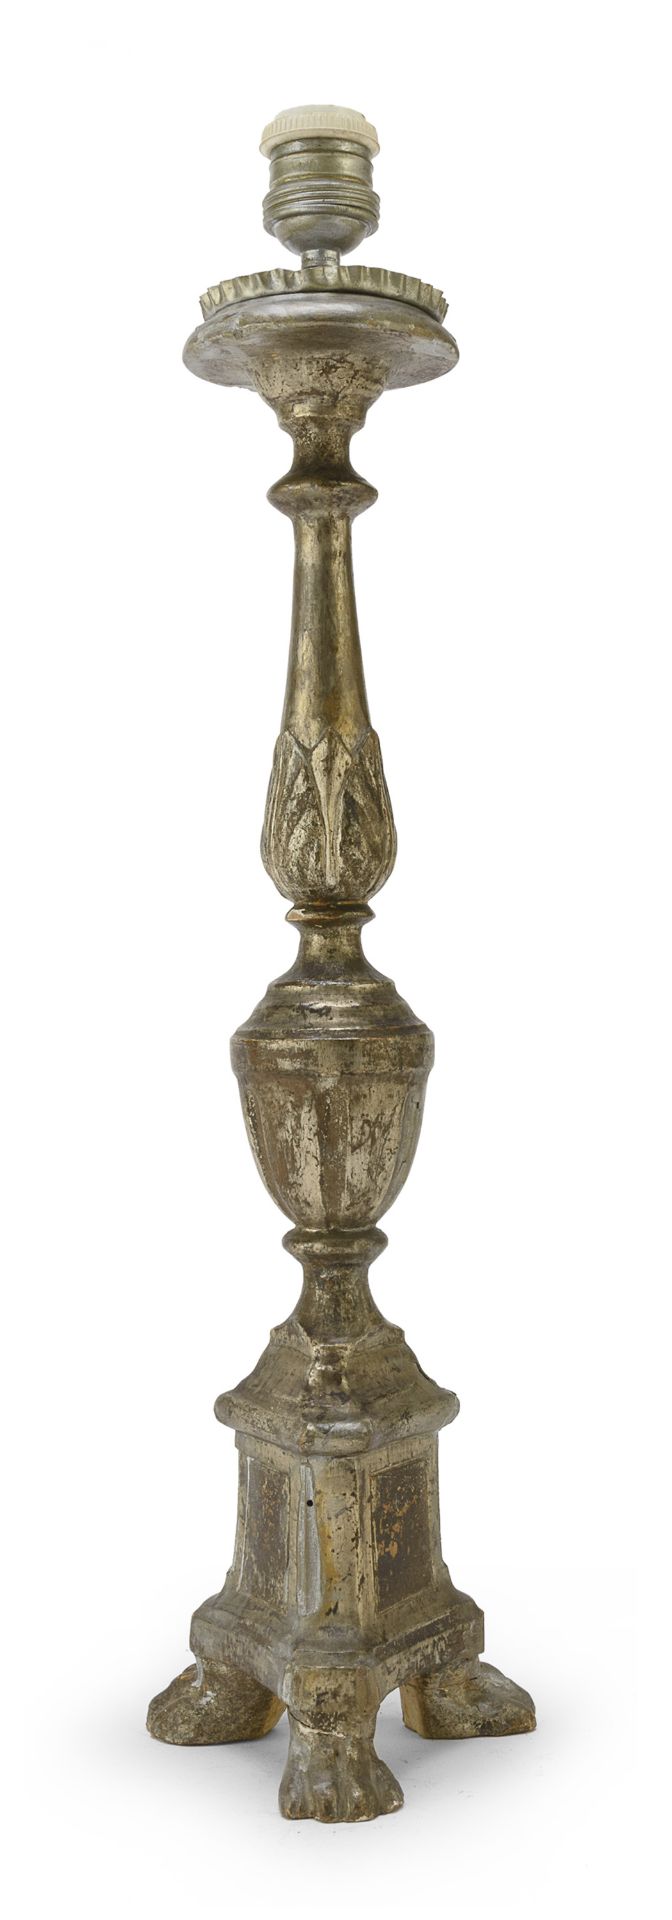 GILTWOOD CANDLESTICK LATE 18TH CENTURY